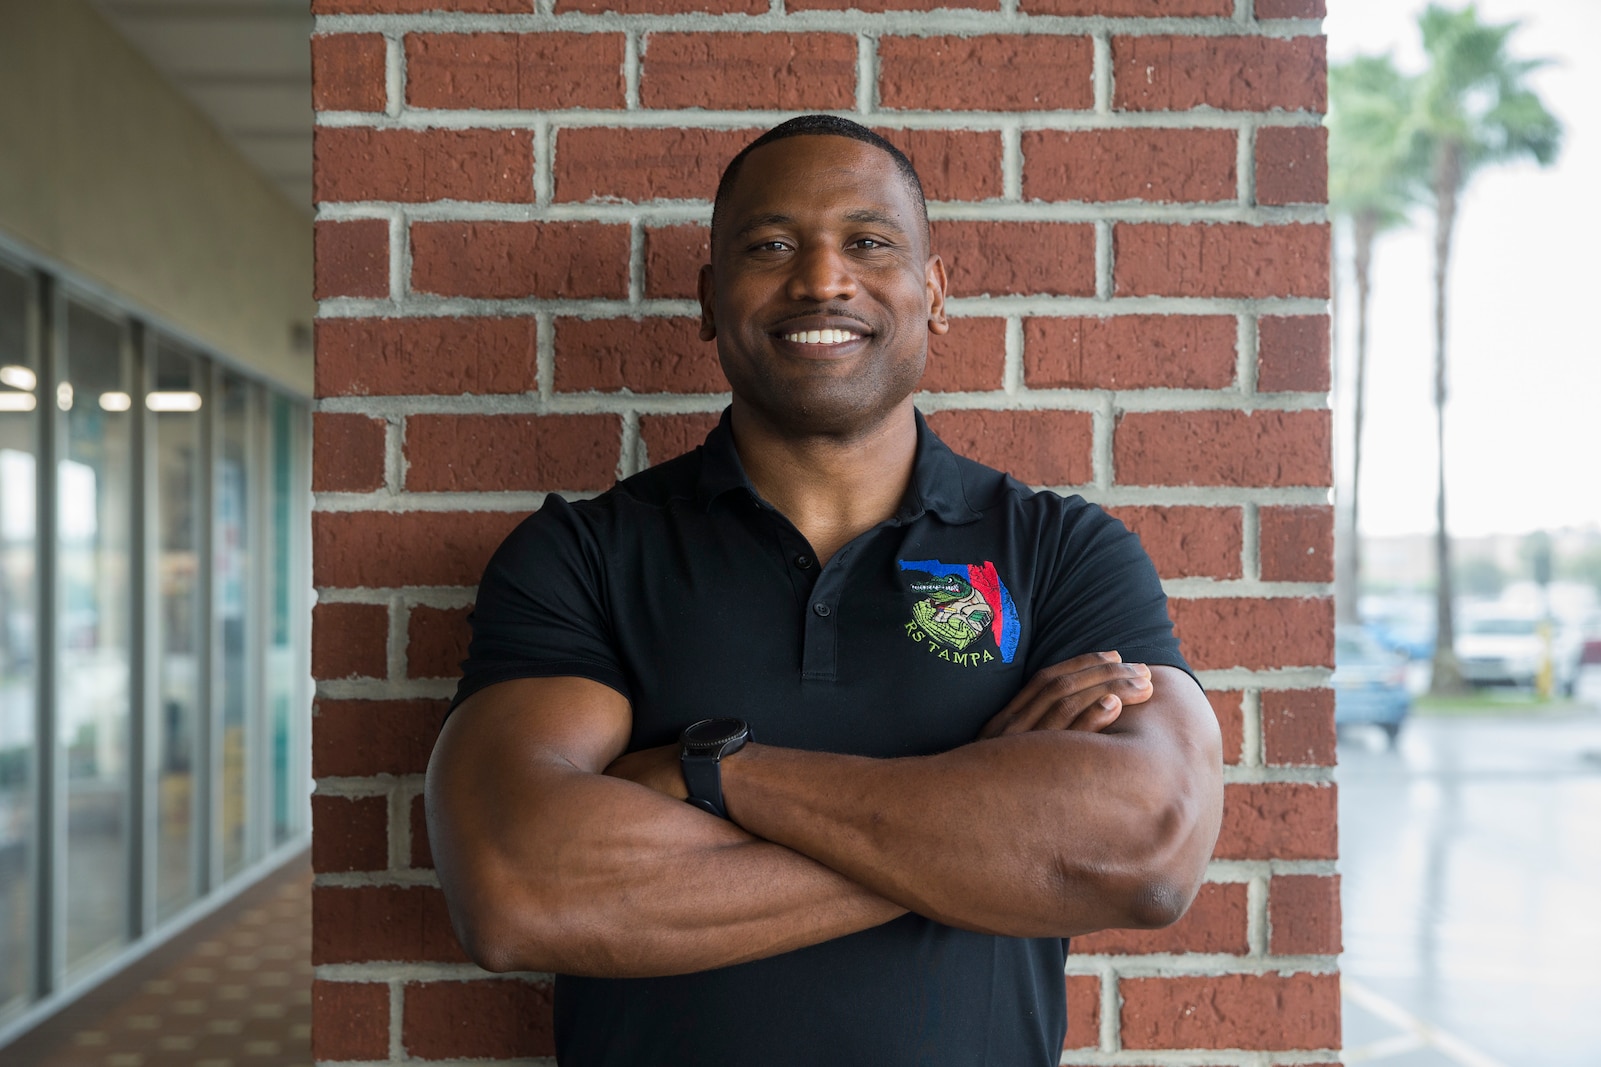 PORT RICHEY, Fla. -- As a child, Staff Sgt. Absalom Johnson moved often. When he graduated from Hercules High School in 2010, he was finally able to plant roots and become part of a community. He became a bank teller while also coaching high...